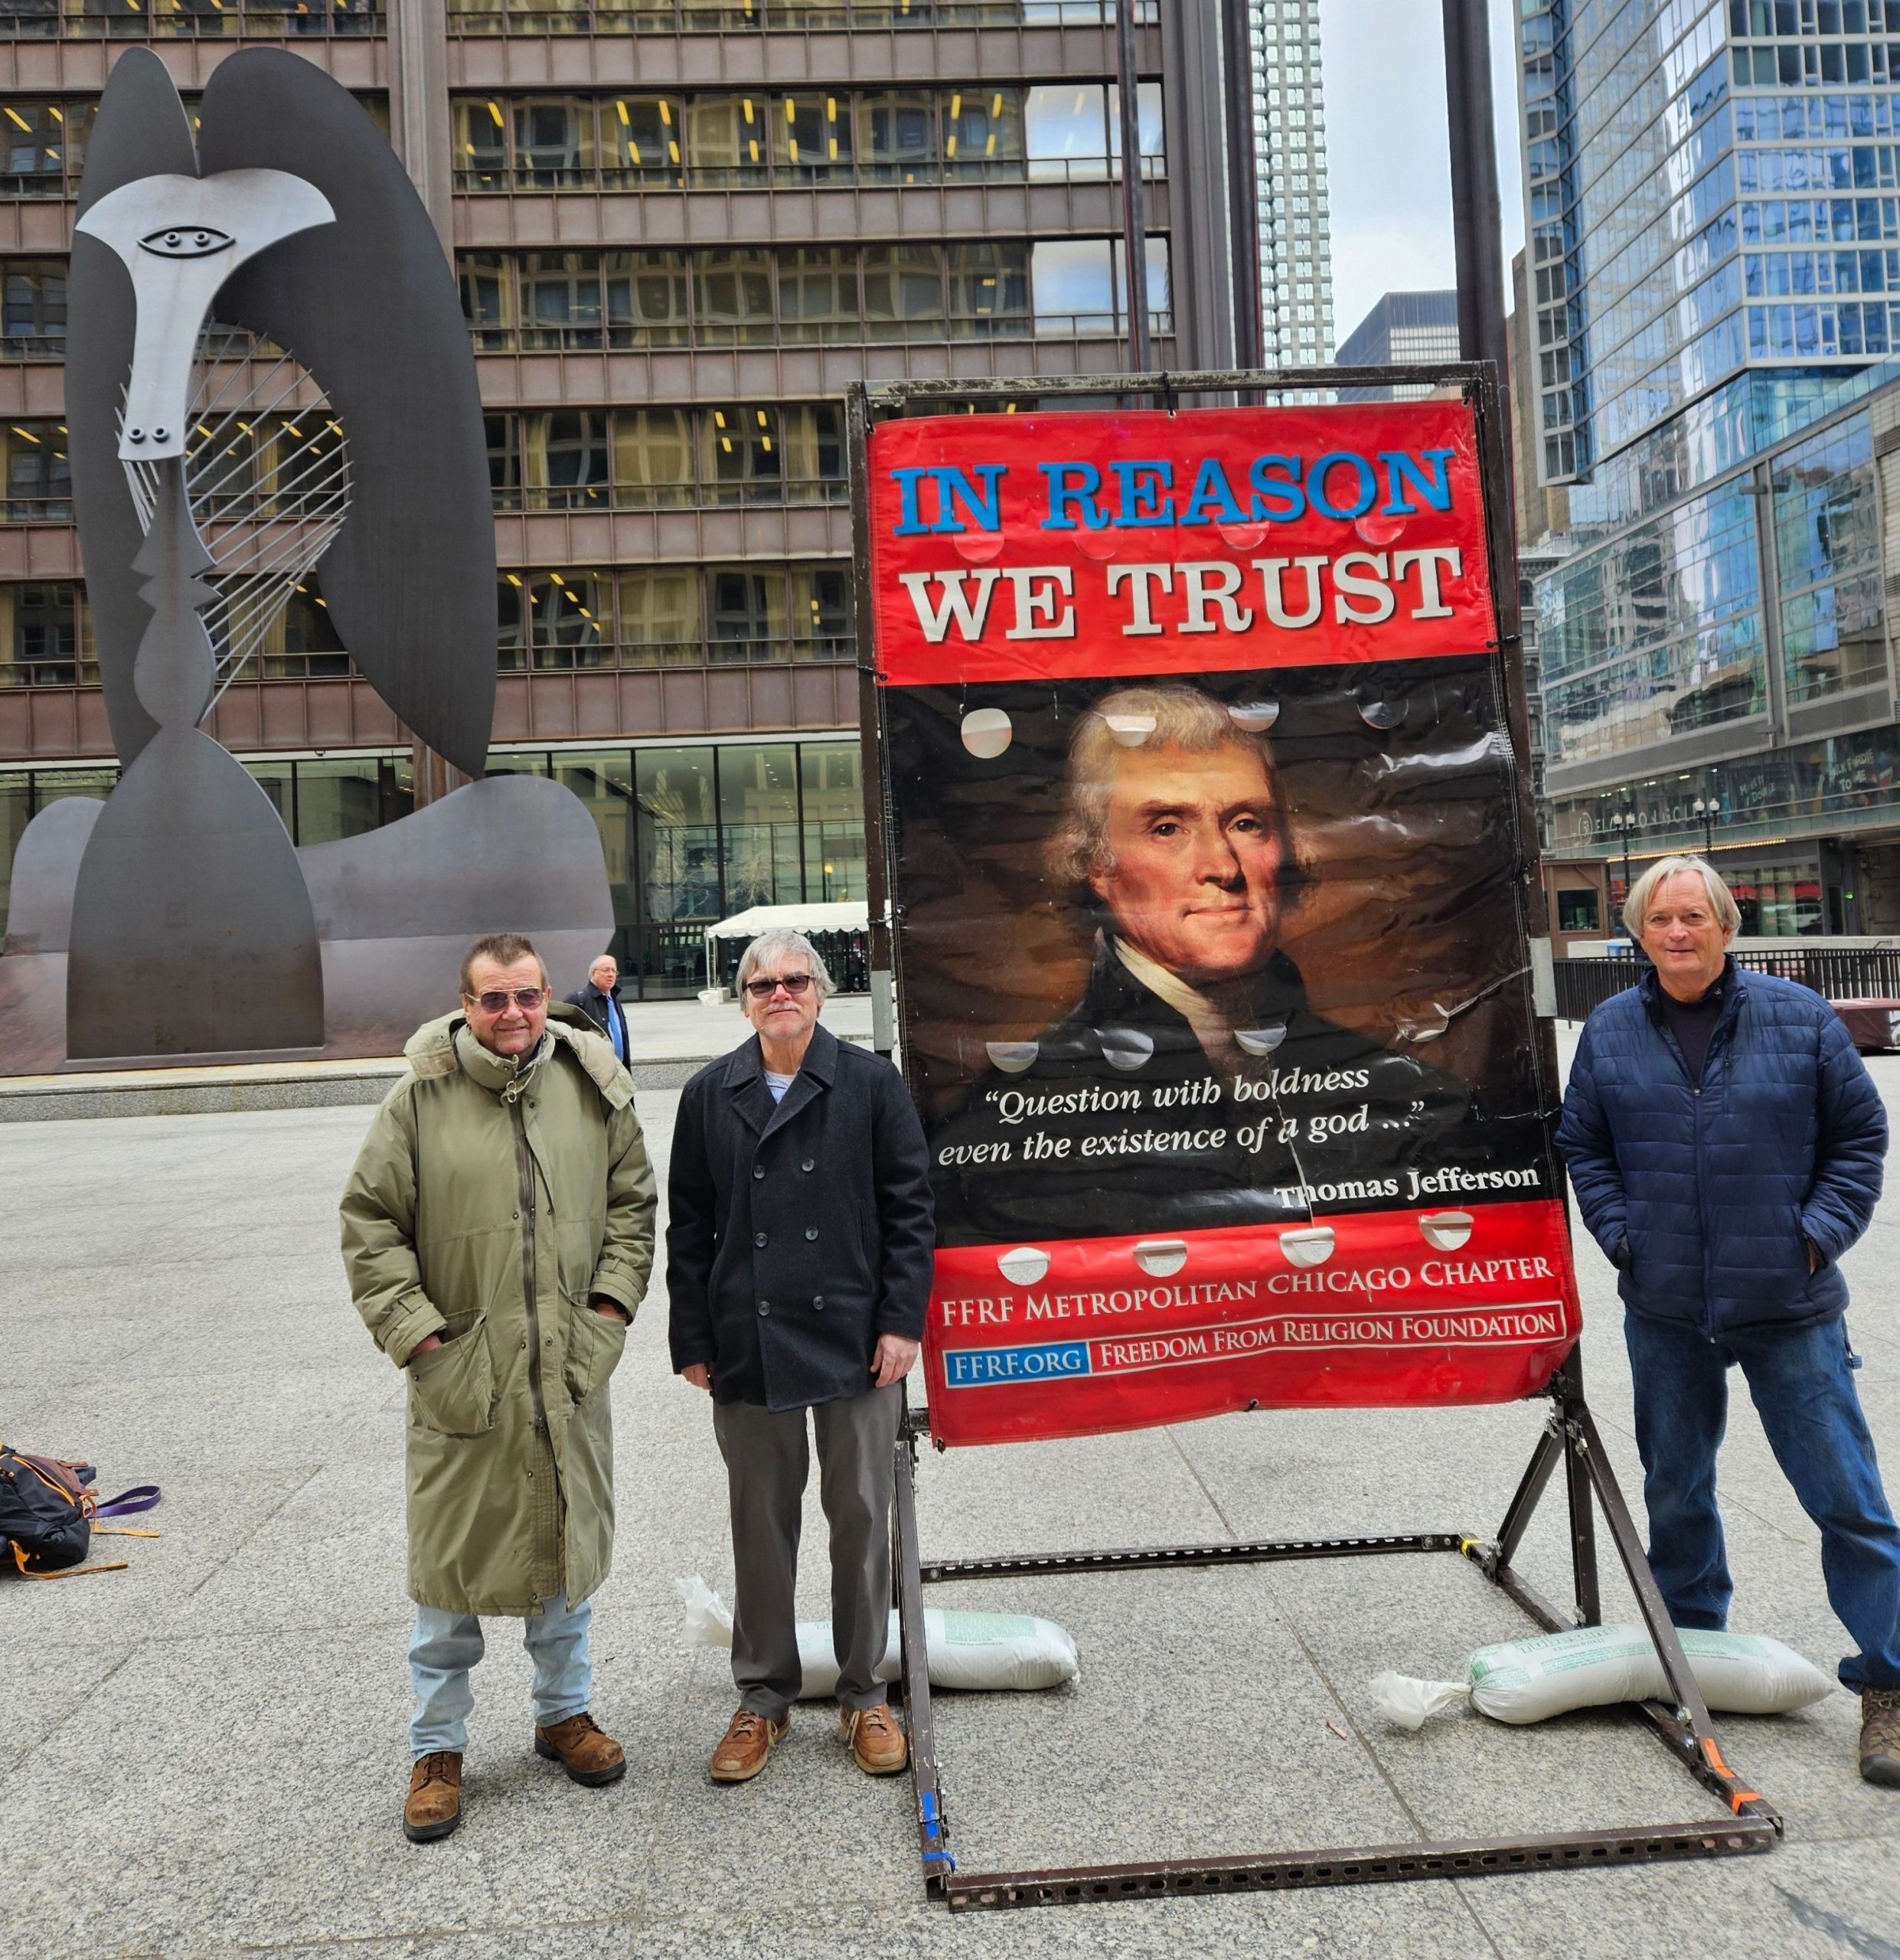 A group of men in front of a sign reading "In Reason We Trust" in Chicago